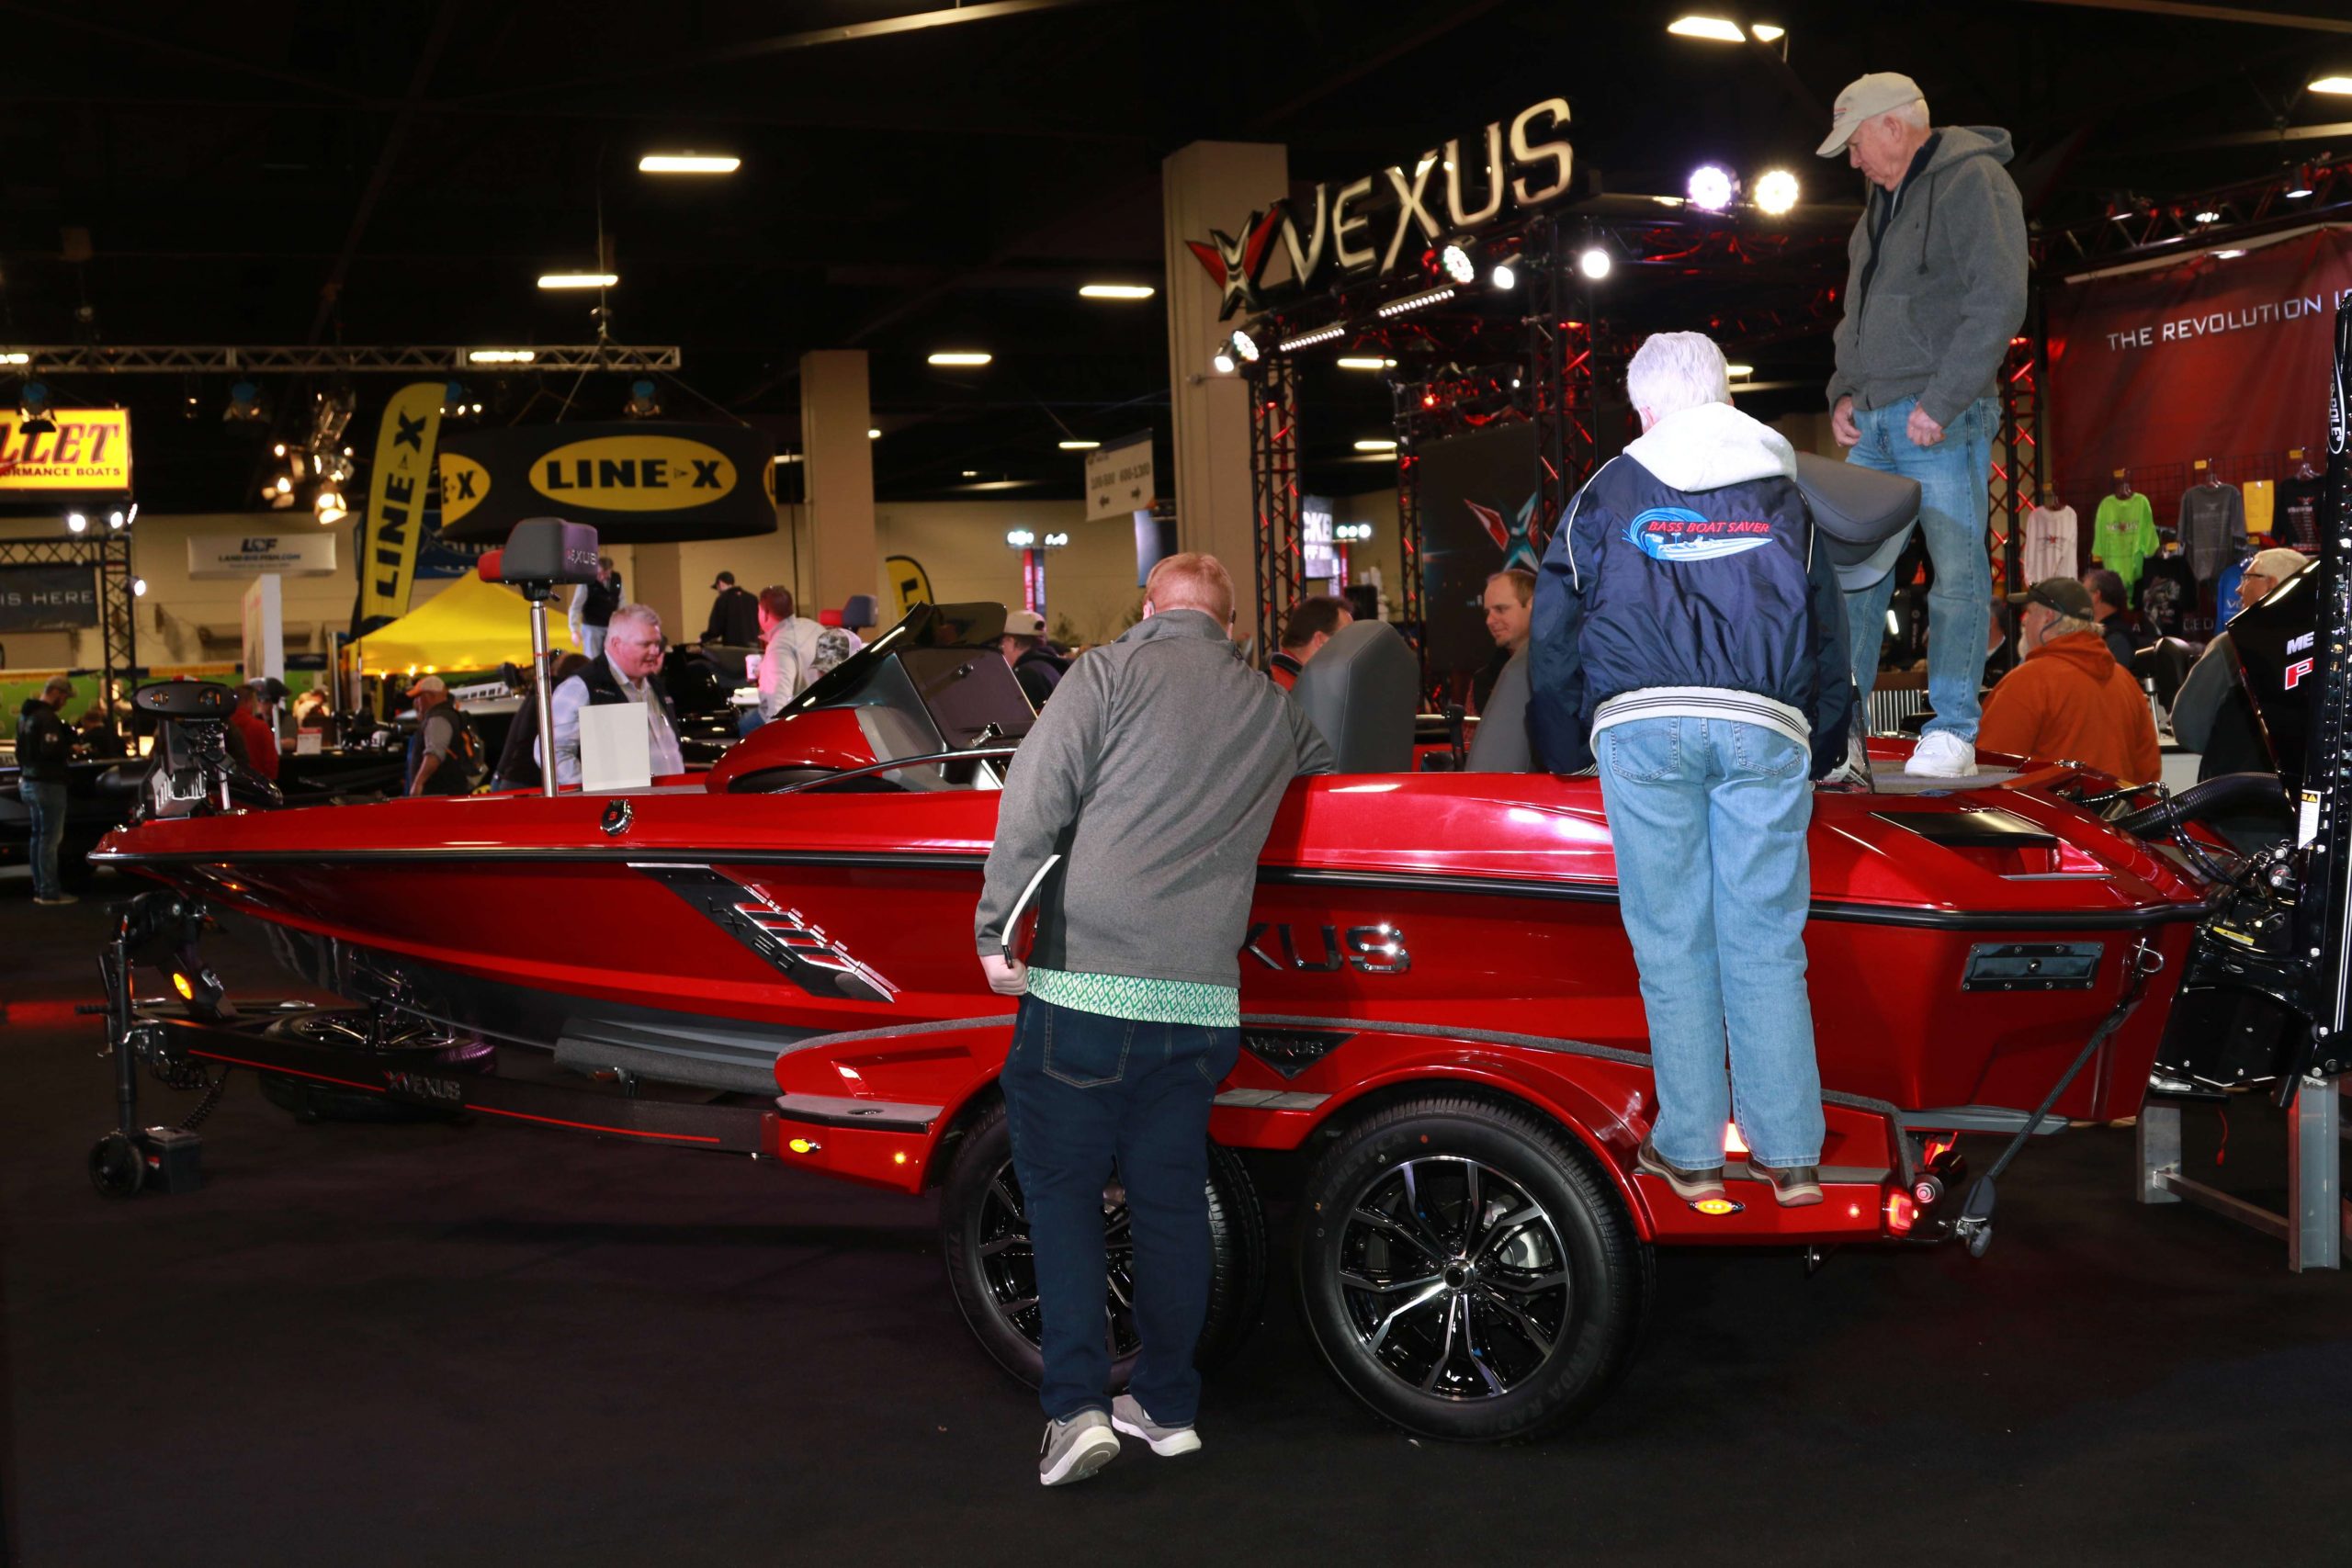 The newly introduced Vexus VX20 in crimson red attracted lots of interest.